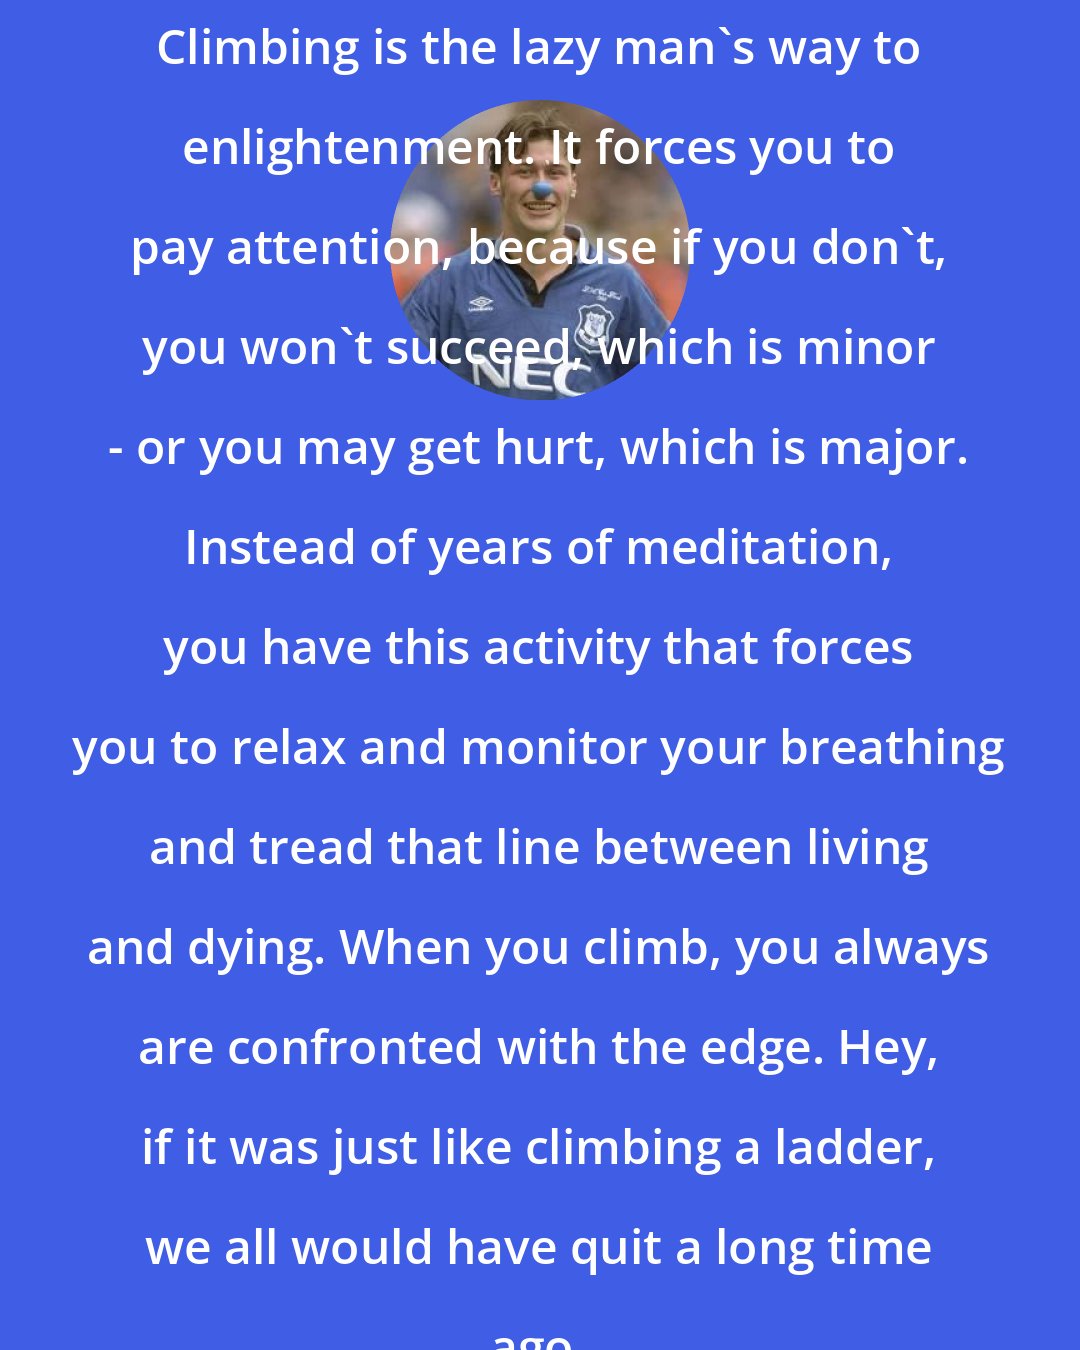 Duncan Ferguson: Climbing is the lazy man's way to enlightenment. It forces you to pay attention, because if you don't, you won't succeed, which is minor - or you may get hurt, which is major. Instead of years of meditation, you have this activity that forces you to relax and monitor your breathing and tread that line between living and dying. When you climb, you always are confronted with the edge. Hey, if it was just like climbing a ladder, we all would have quit a long time ago.